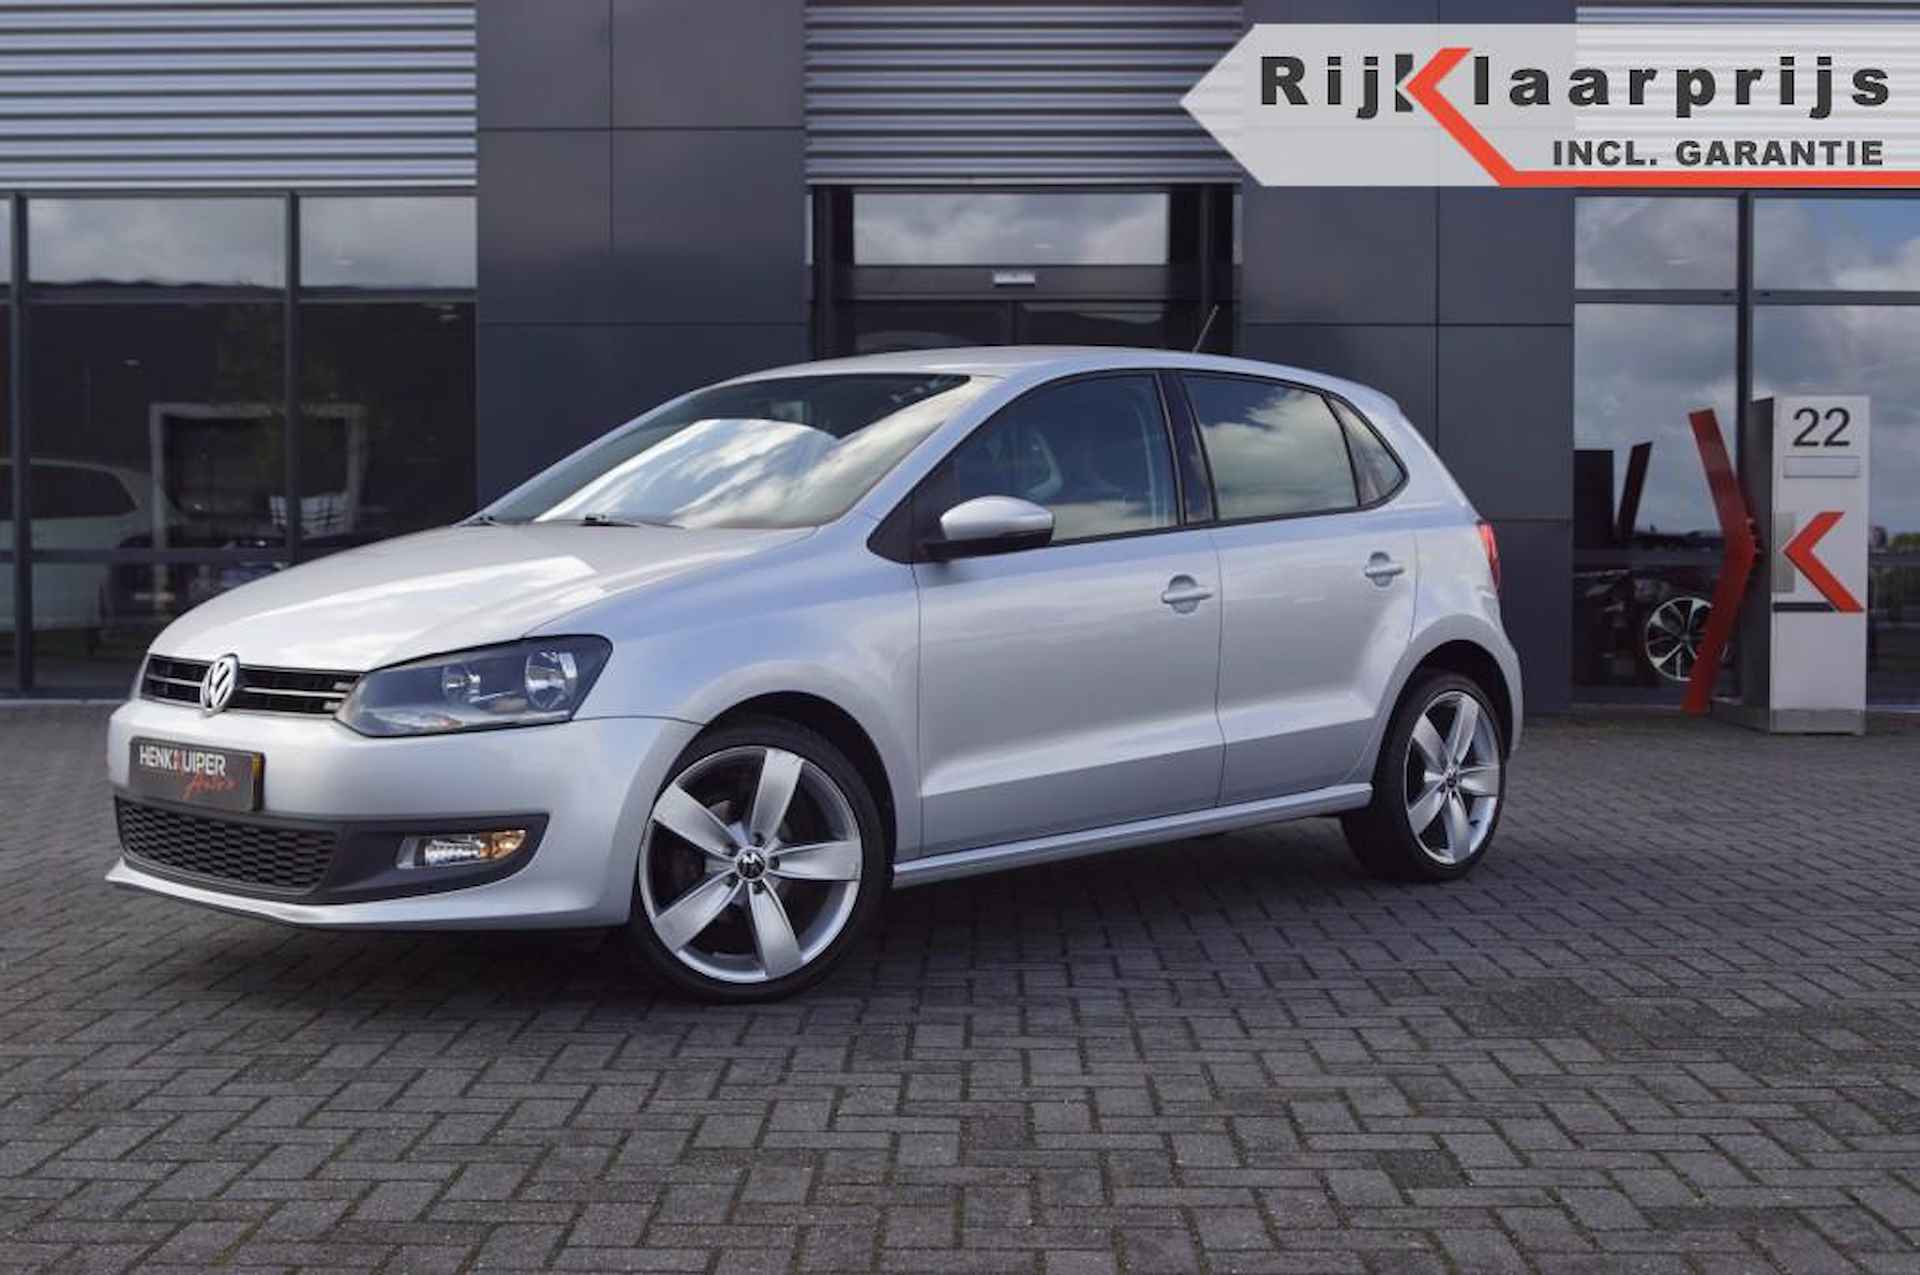 VOLKSWAGEN Polo 1.2 TSI Comfortline 90pk / Airconditioning / 17 LM/ nw. APK ! - 1/27